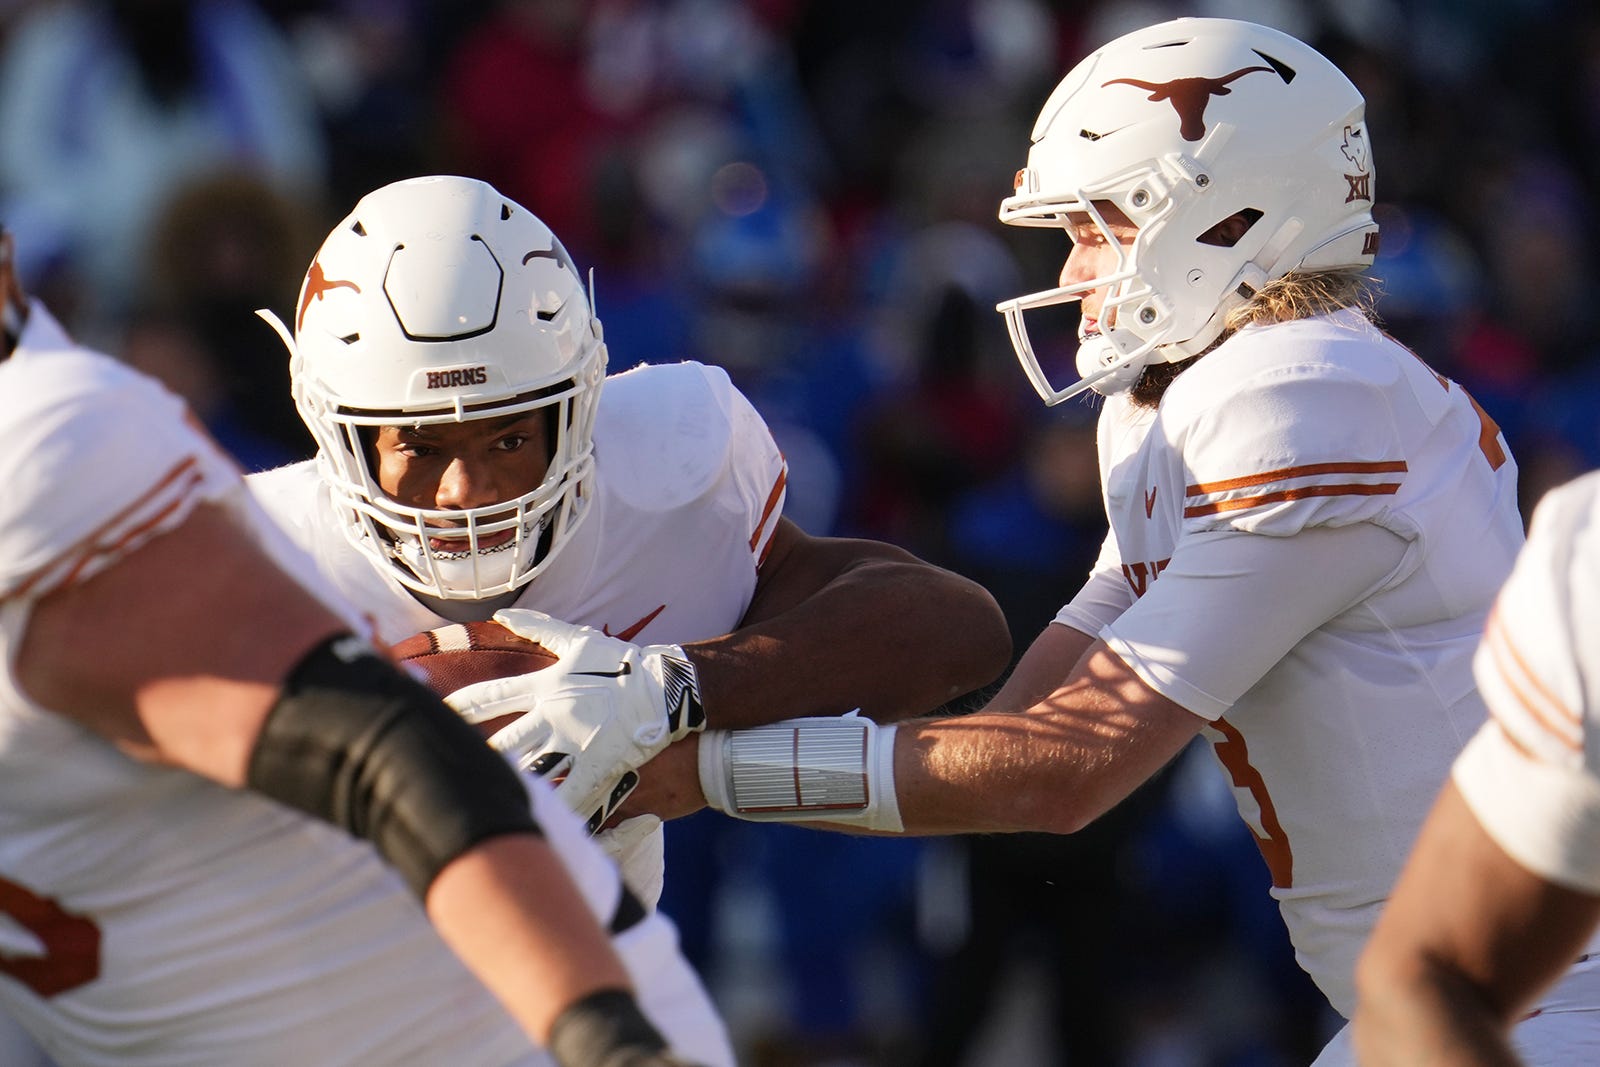 Longhorns Cruise Past Jayhawks in 55-14 Blowout Win: Live Game Log